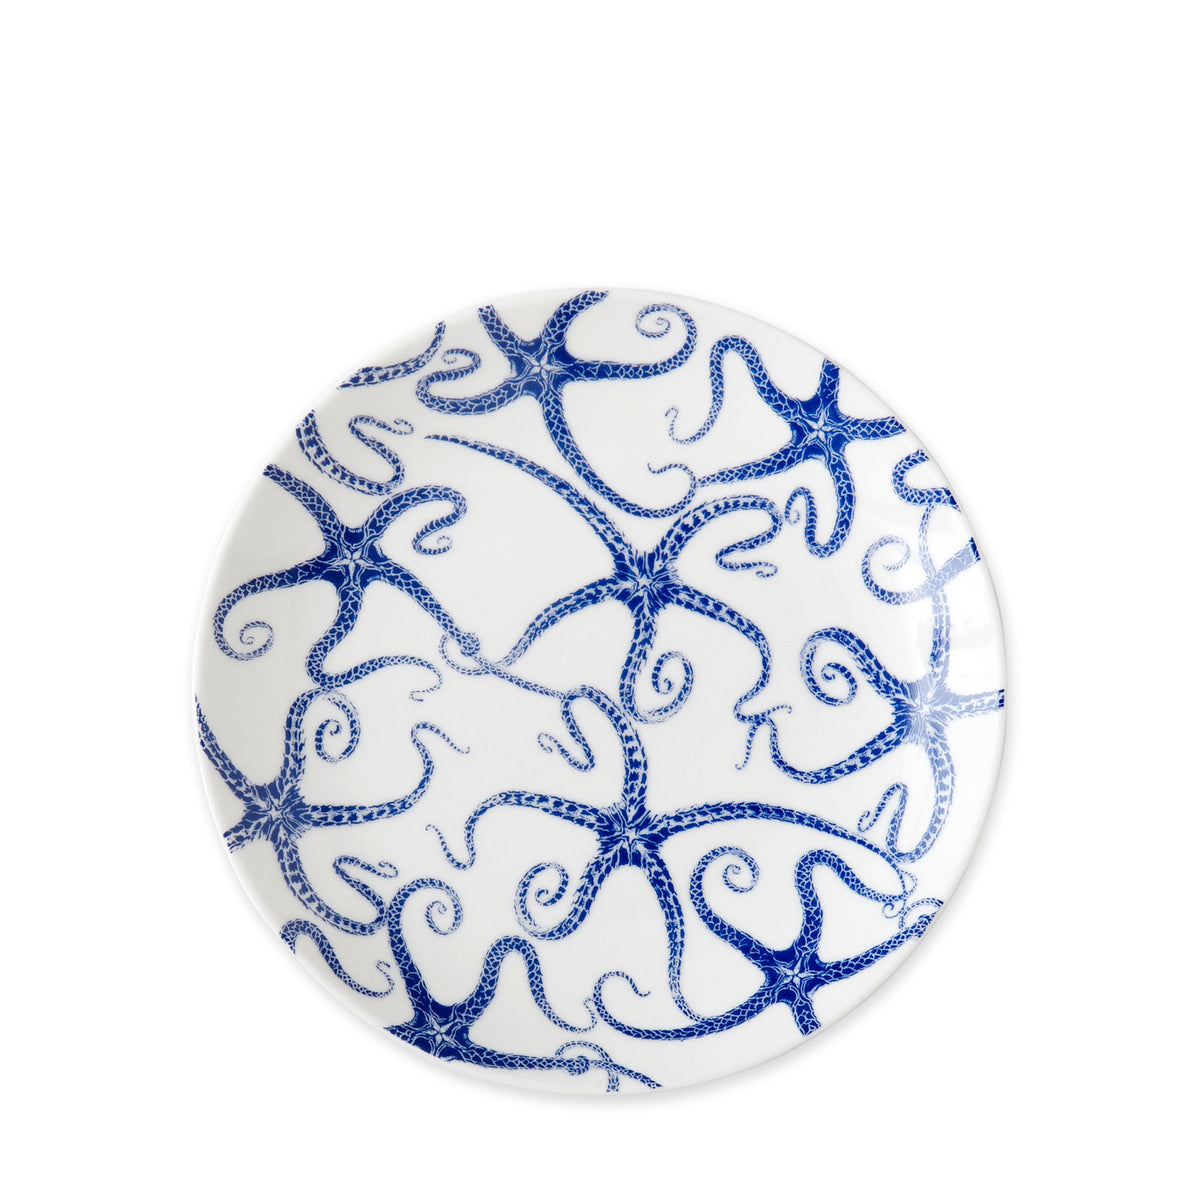 A blue and white plate with an octopus design from the Caskata Starfish Starter Set.